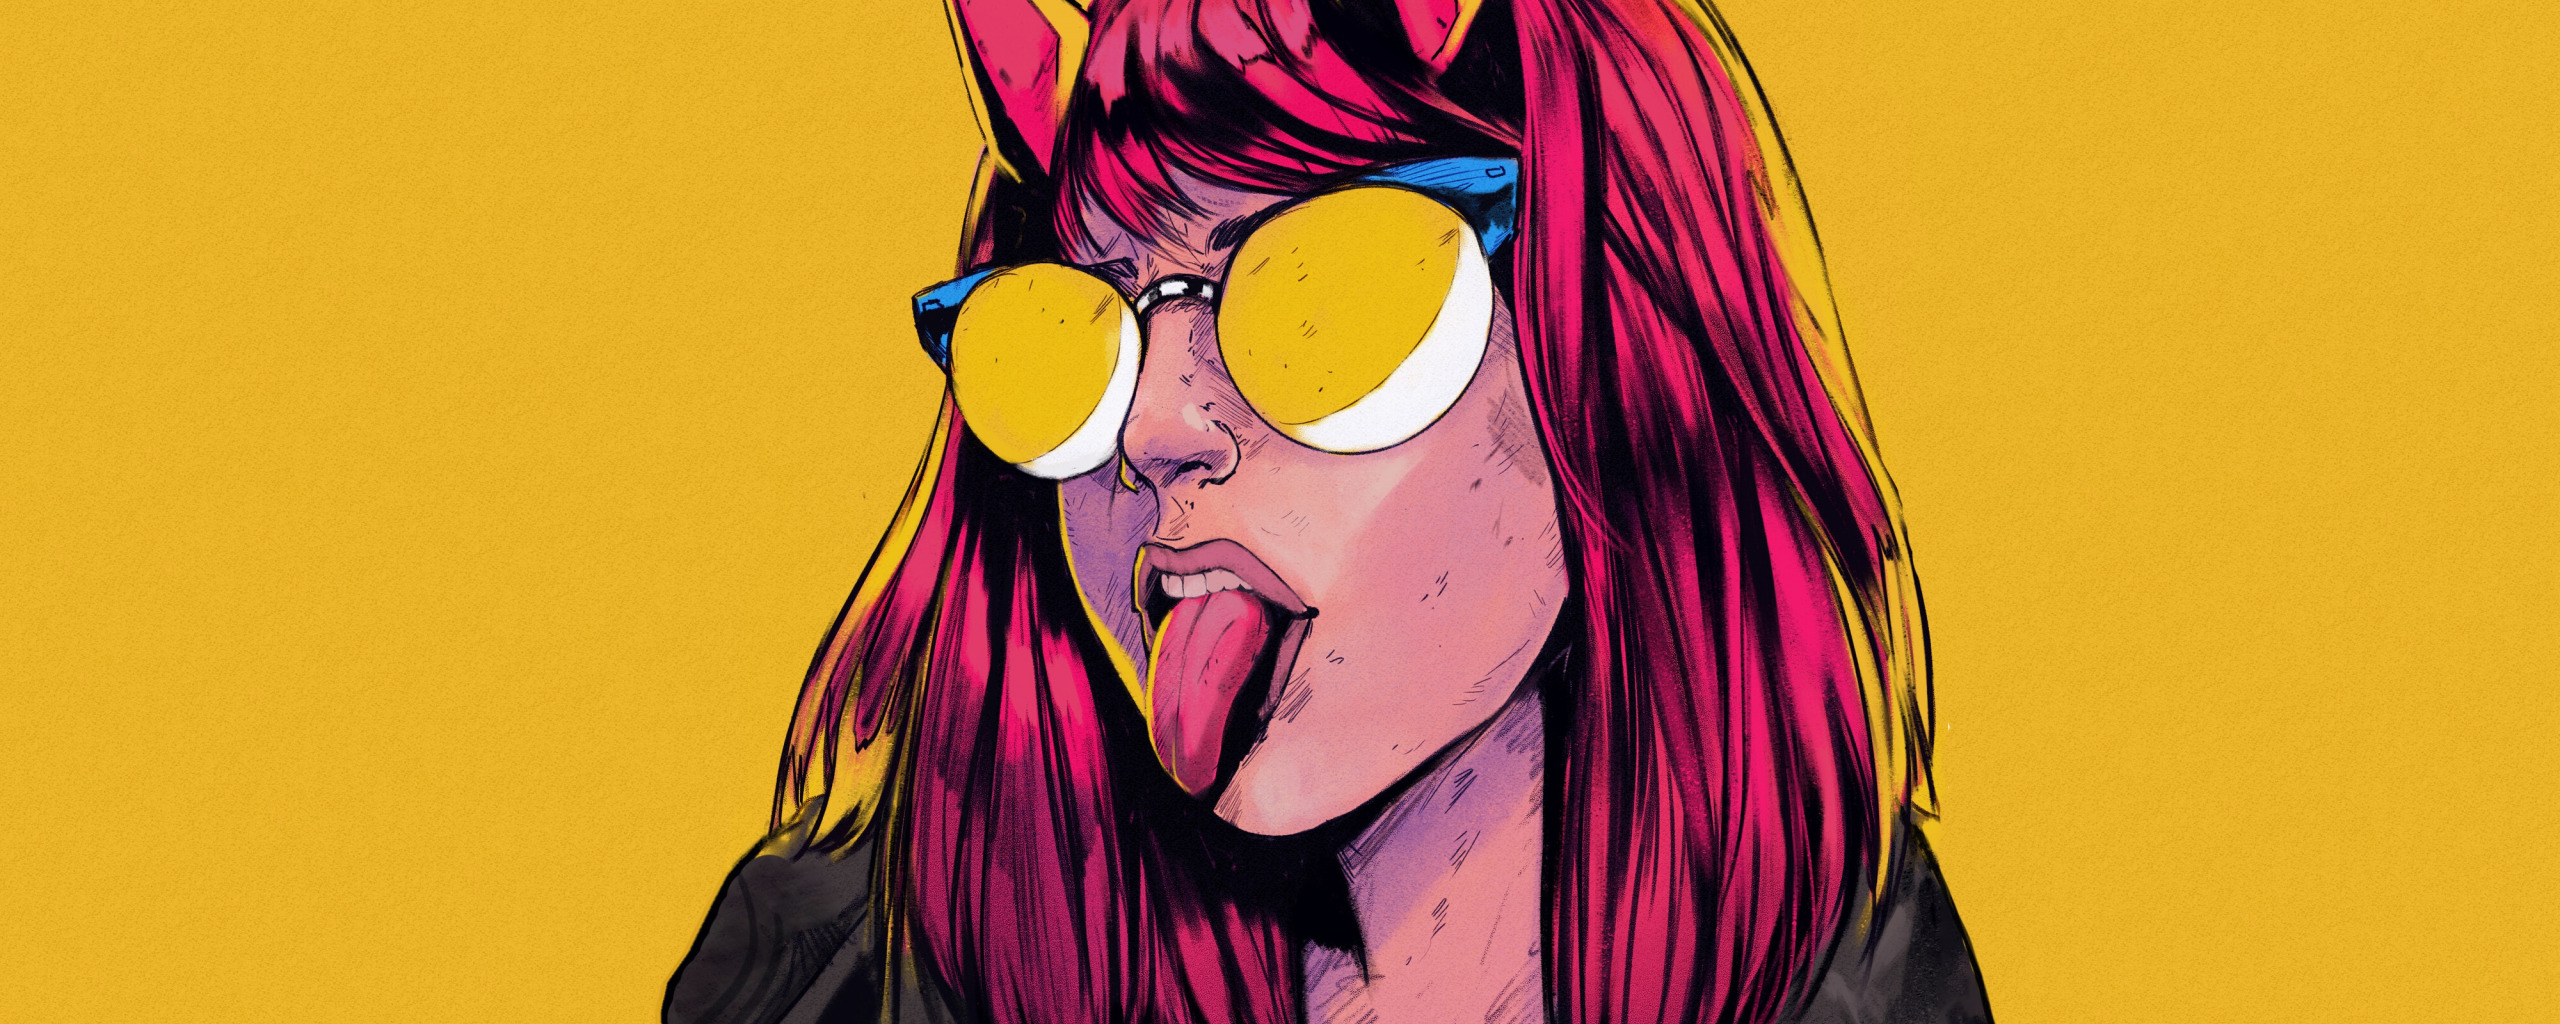 Download wallpaper Girl, Language, Glasses, Style, Face, Girl, Horns, Art, Art, Style, Face, Glasses, Horns, Tongue, Aesthetic, Bruno Ferreira, section art in resolution 2560x1024